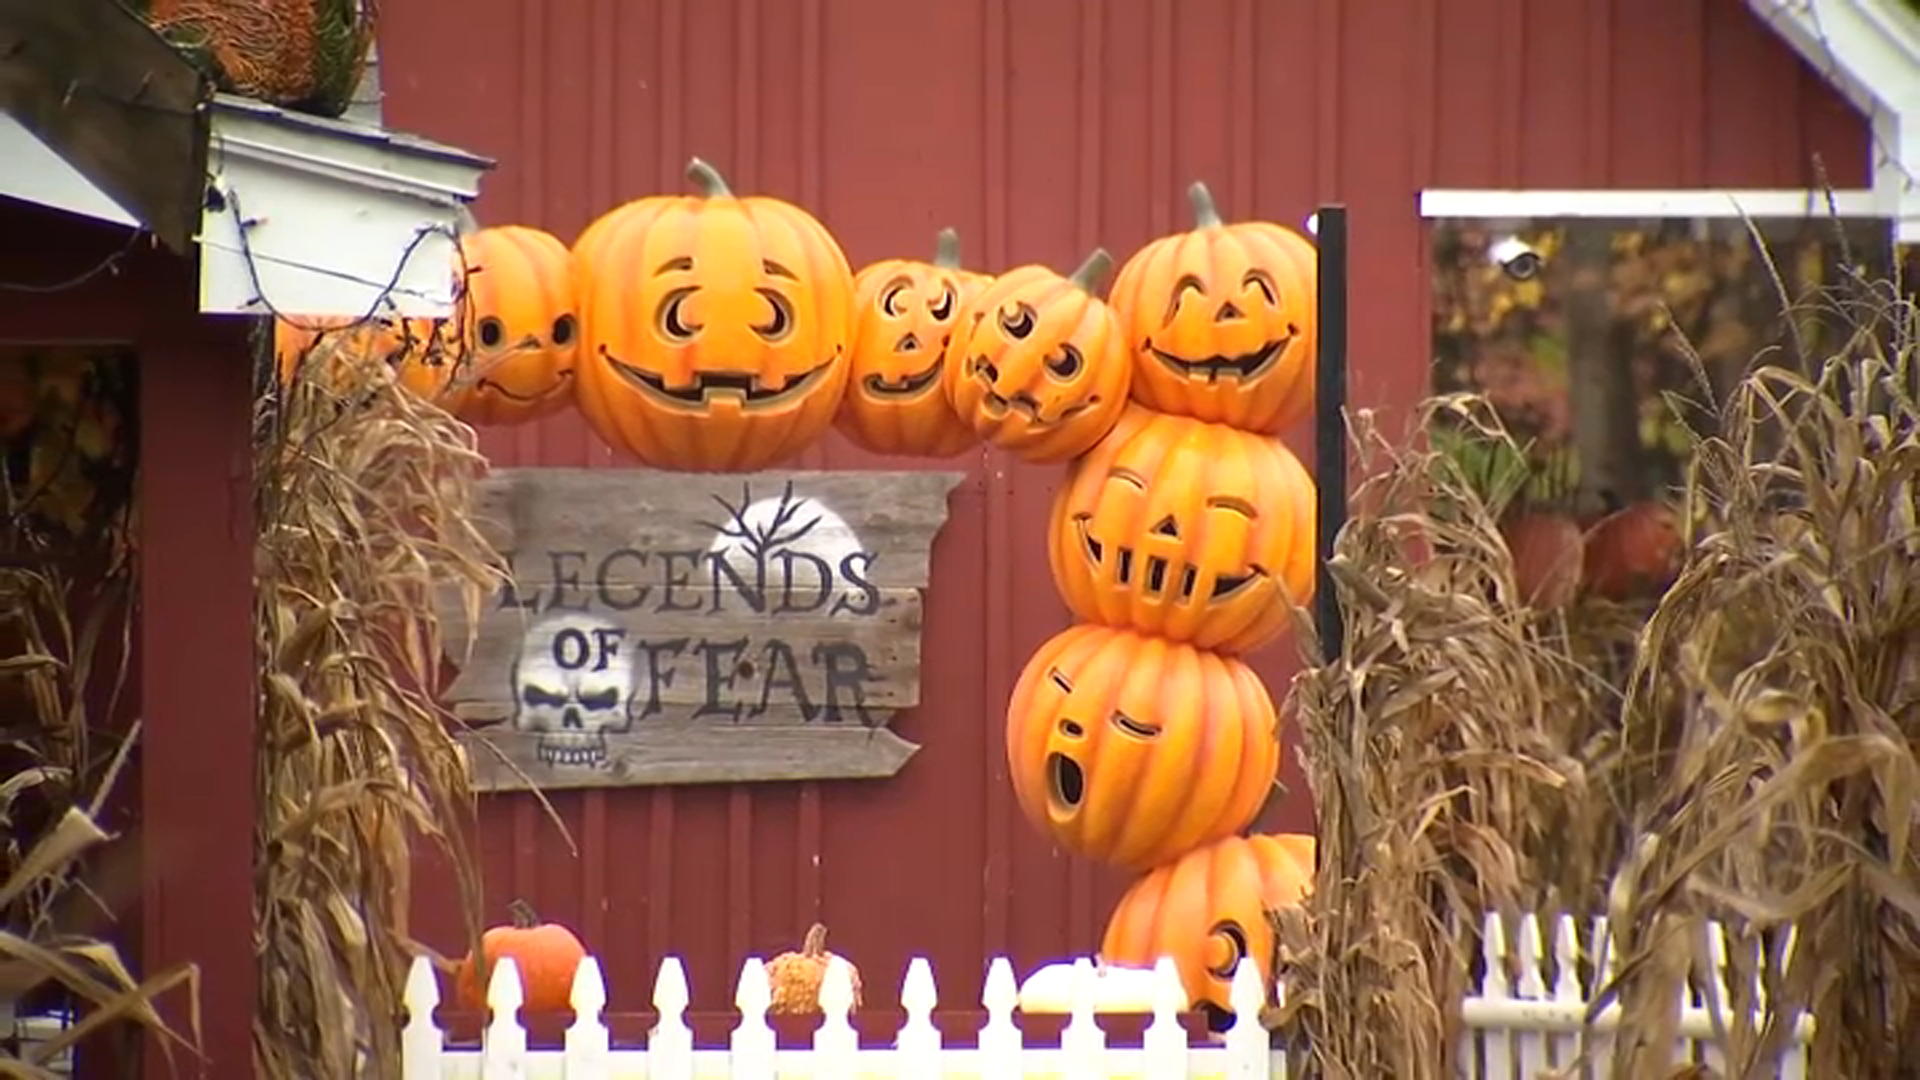 Legends of Fear 2023 Tickets in Shelton, CT, United States